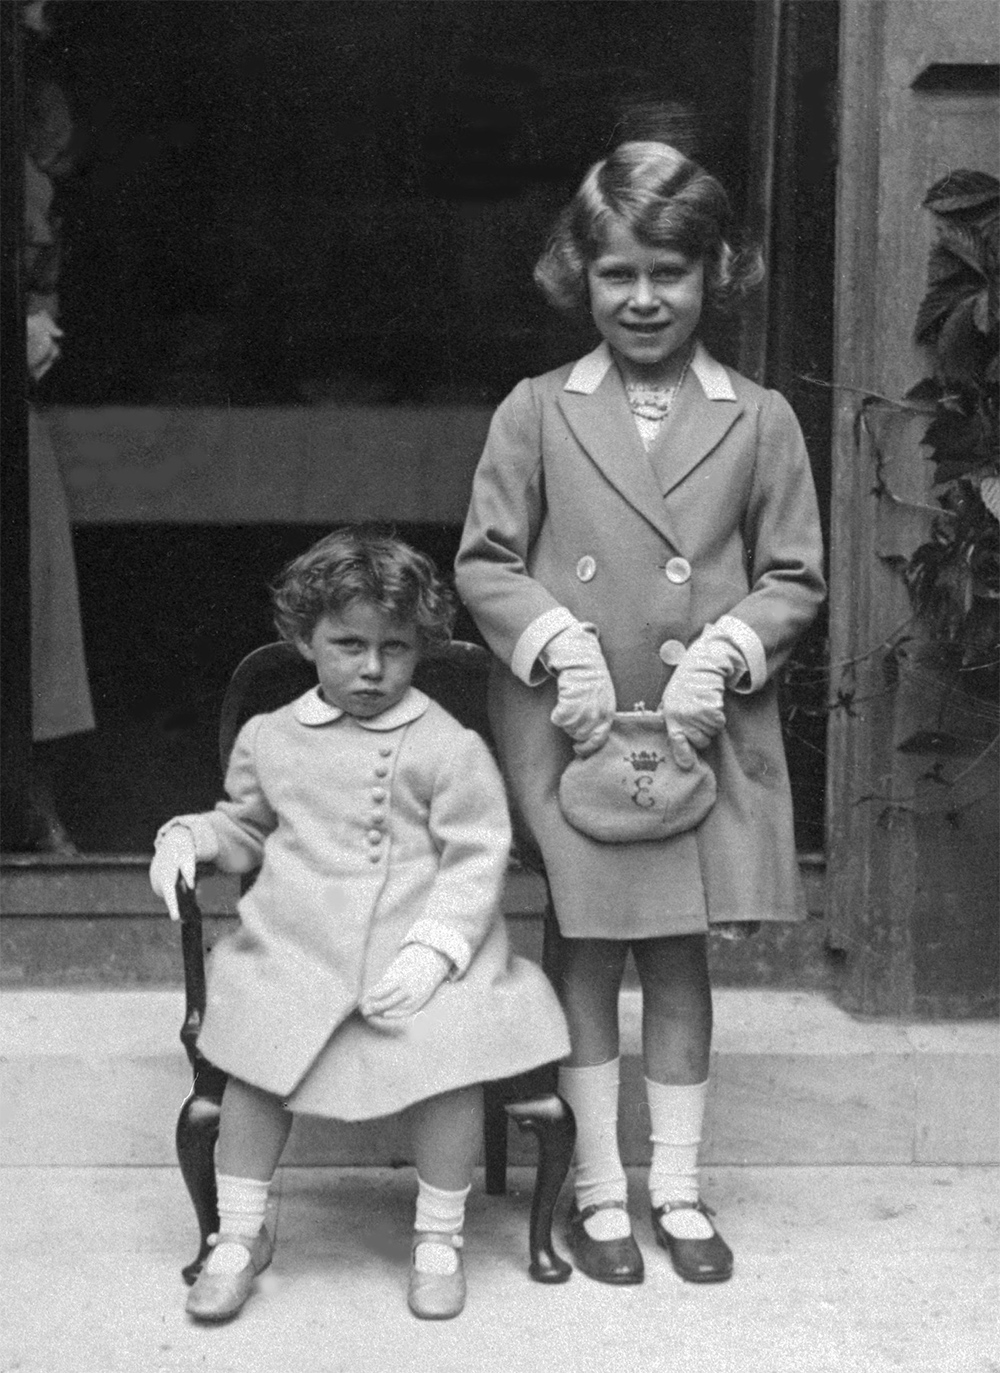 It was clear from a young age Elizabeth was going to enjoy fashion - even as a young girl, Princess Elizabeth (right) always coordinated her bag and gloves with her outfit. Pictured here in 1933 with younger sister, Princess Margaret. Photo: AFP/Getty Images